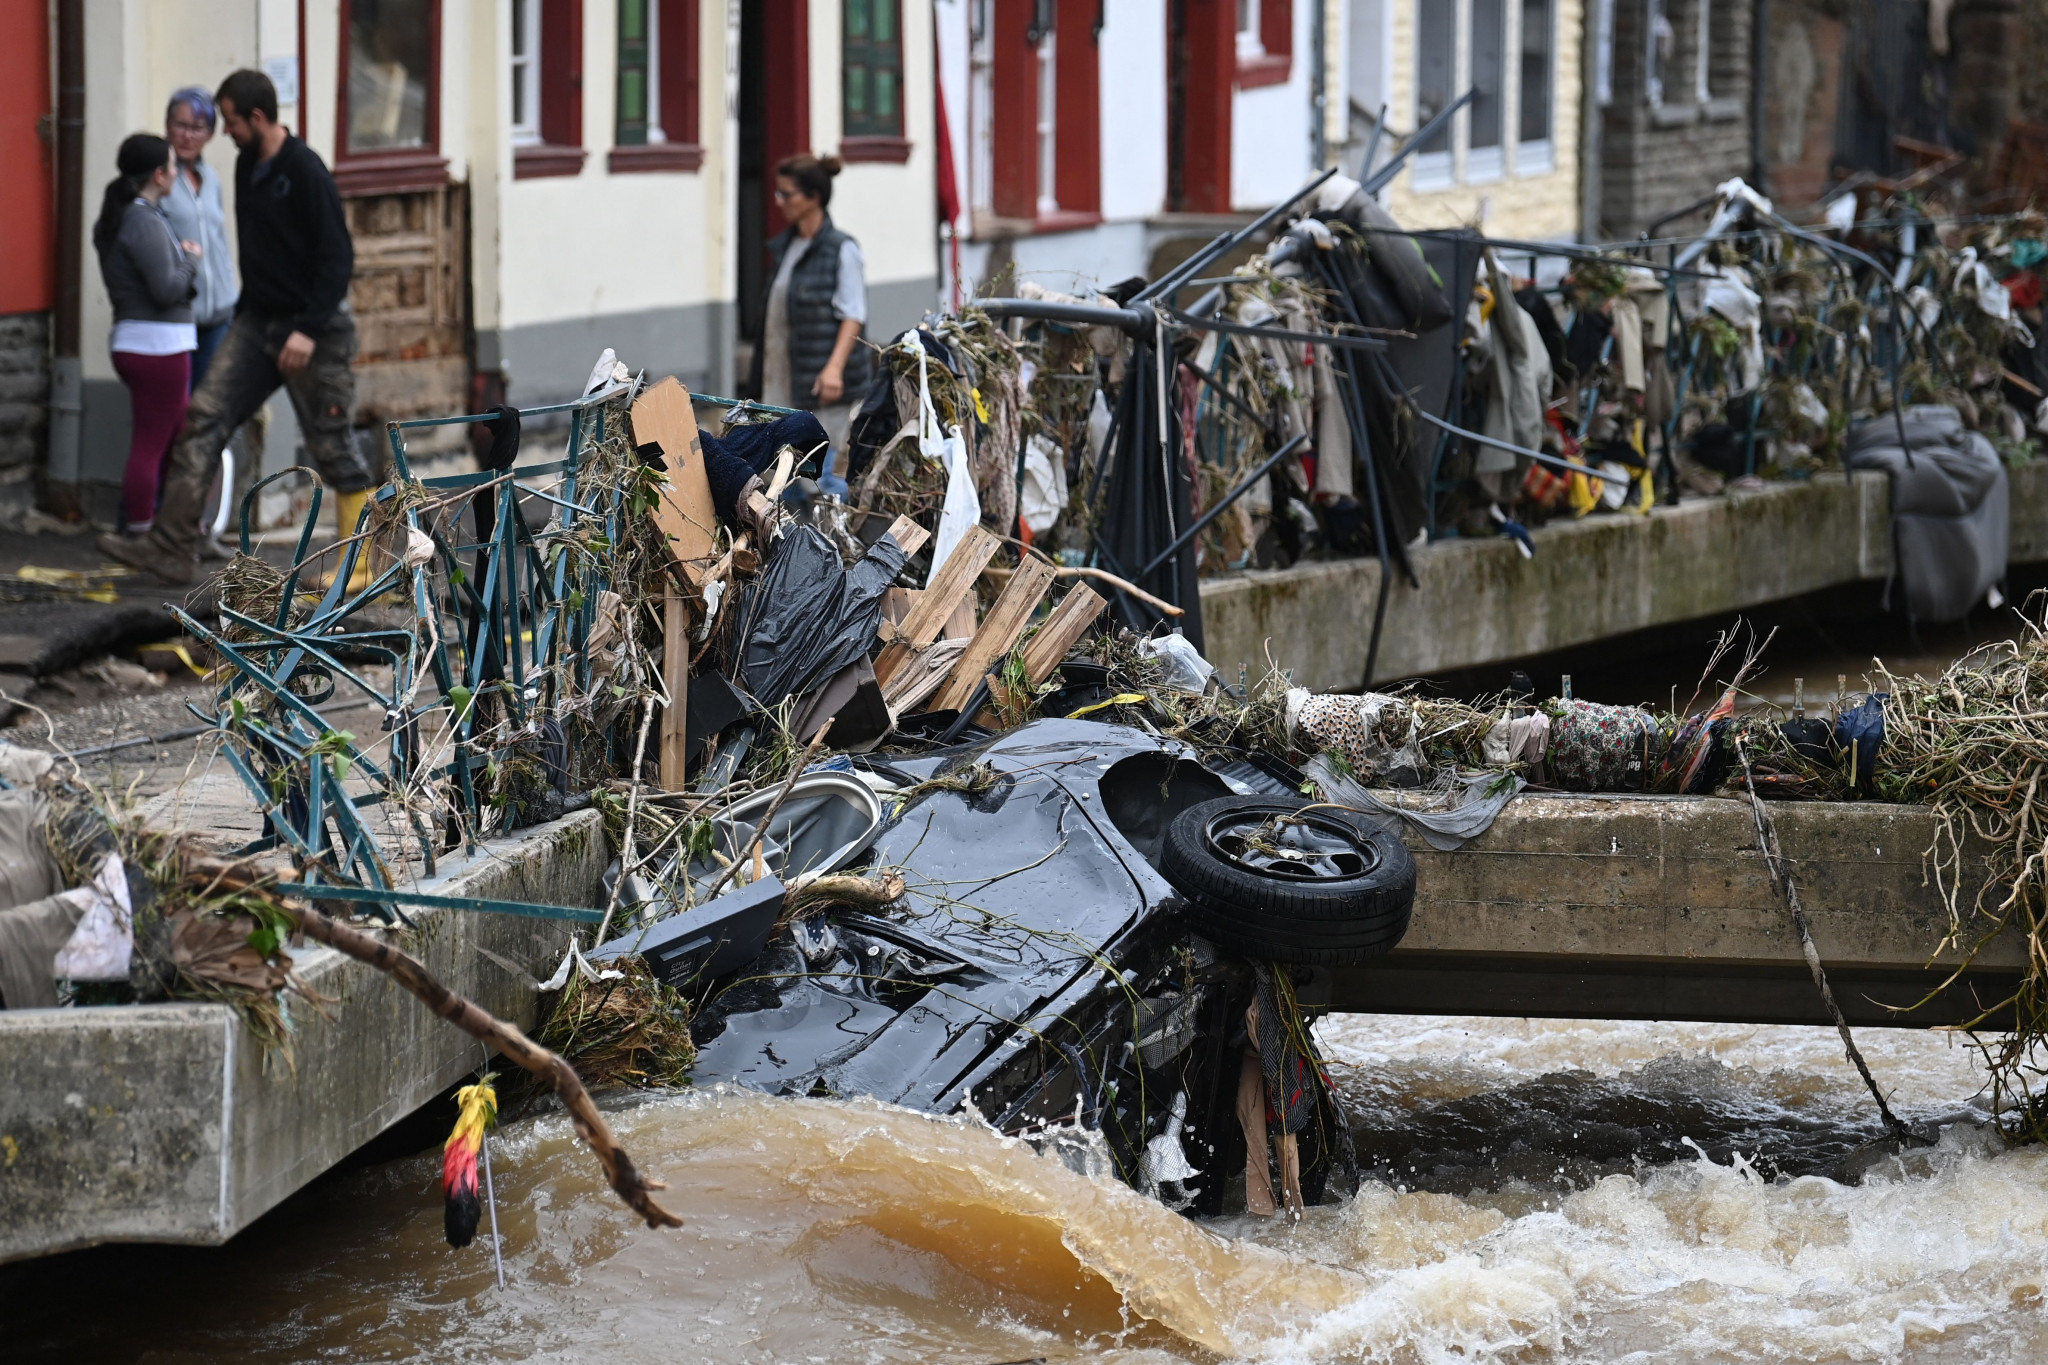 The floods have hit several countries in Western Europe, and are among the worst in the region for decades ©Getty Images